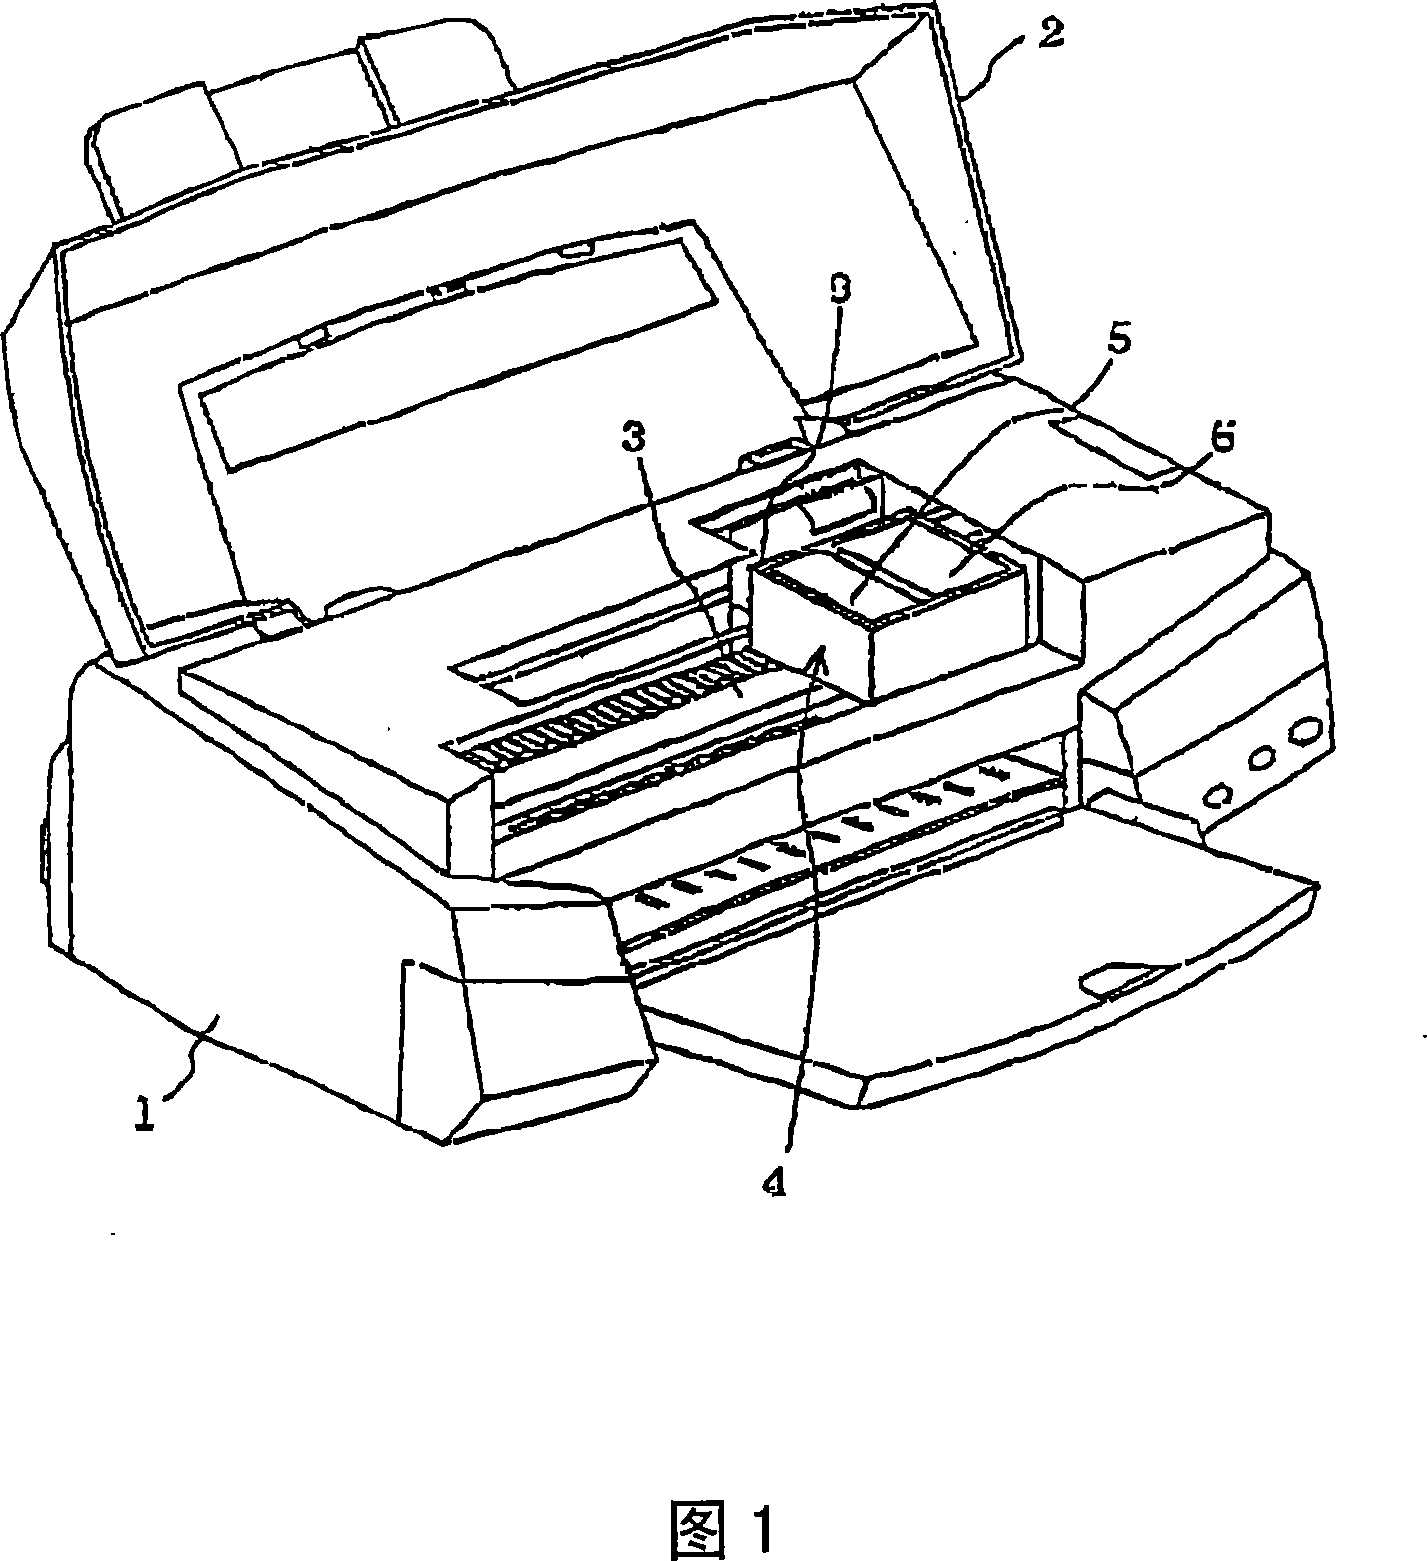 Ink-jet recording device and cartridge